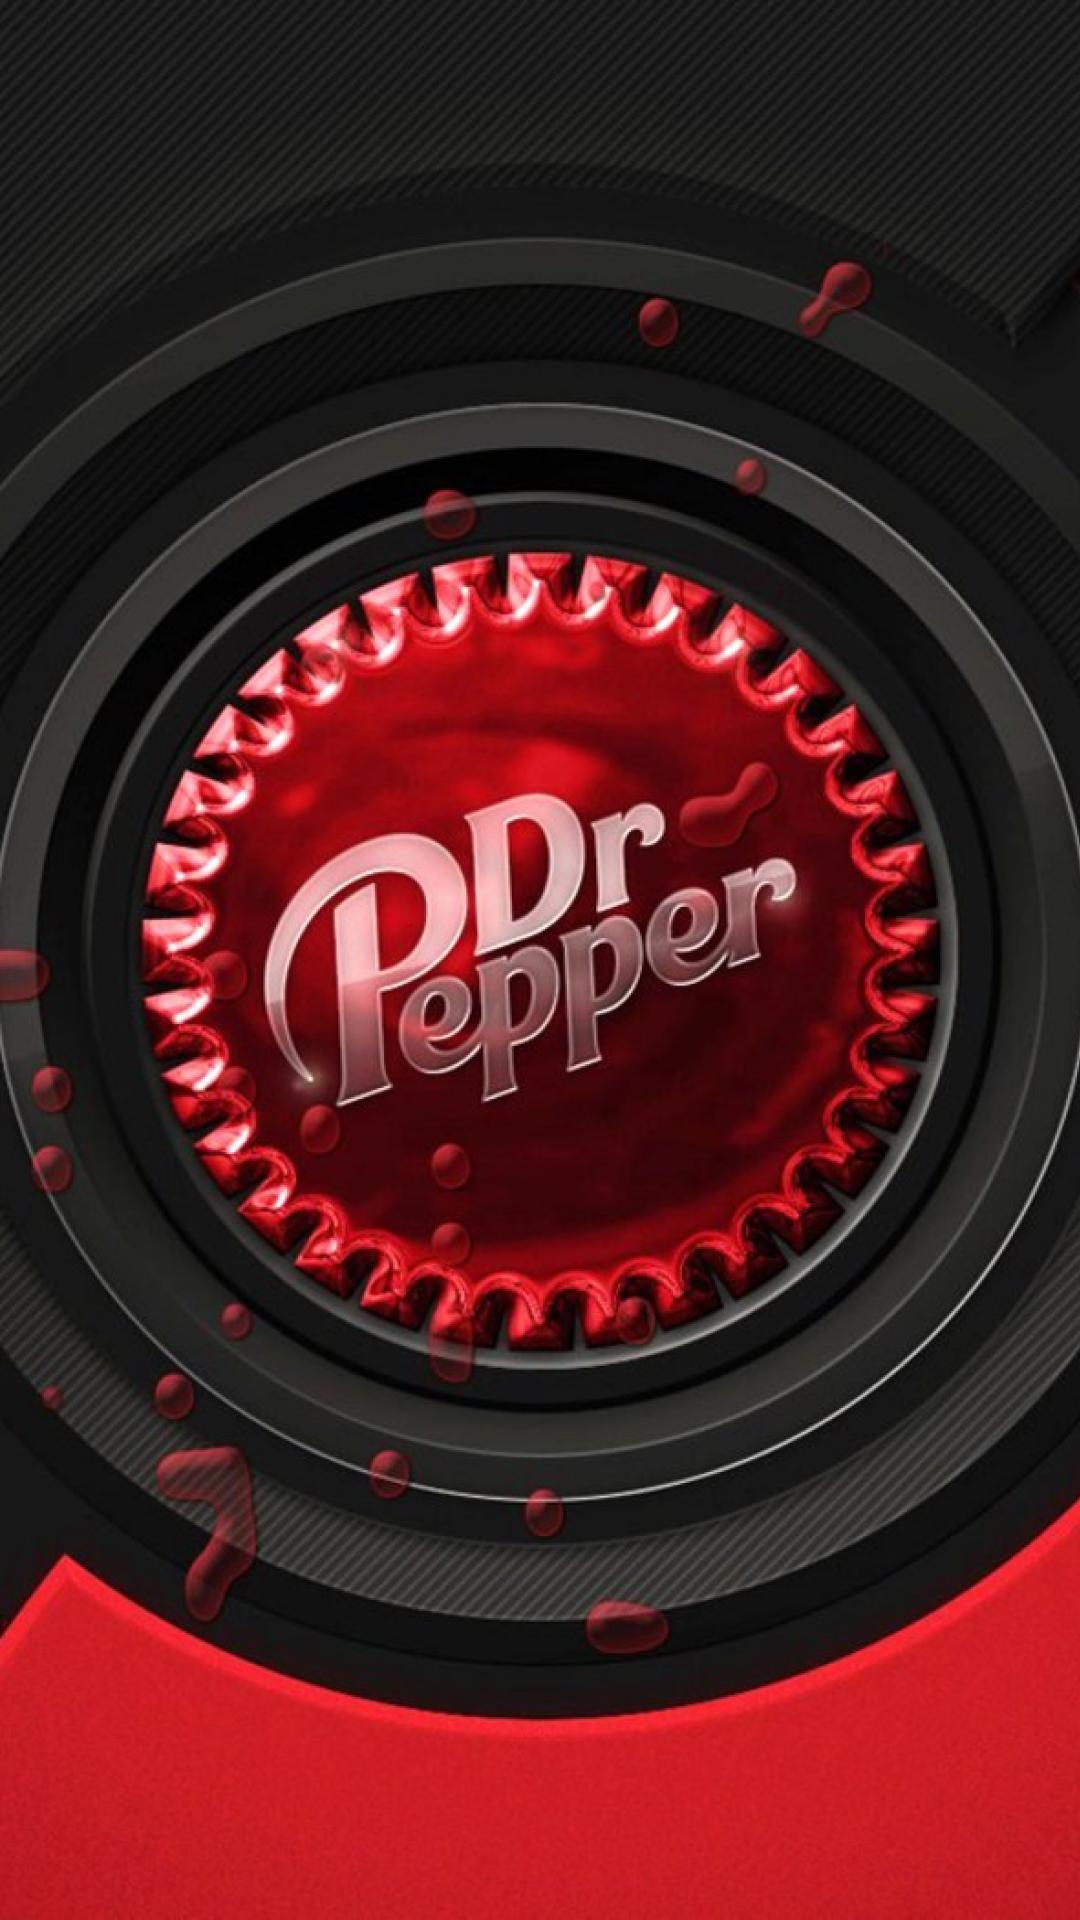 Dr Pepper wallpaper by twistergirl  Download on ZEDGE  6aae